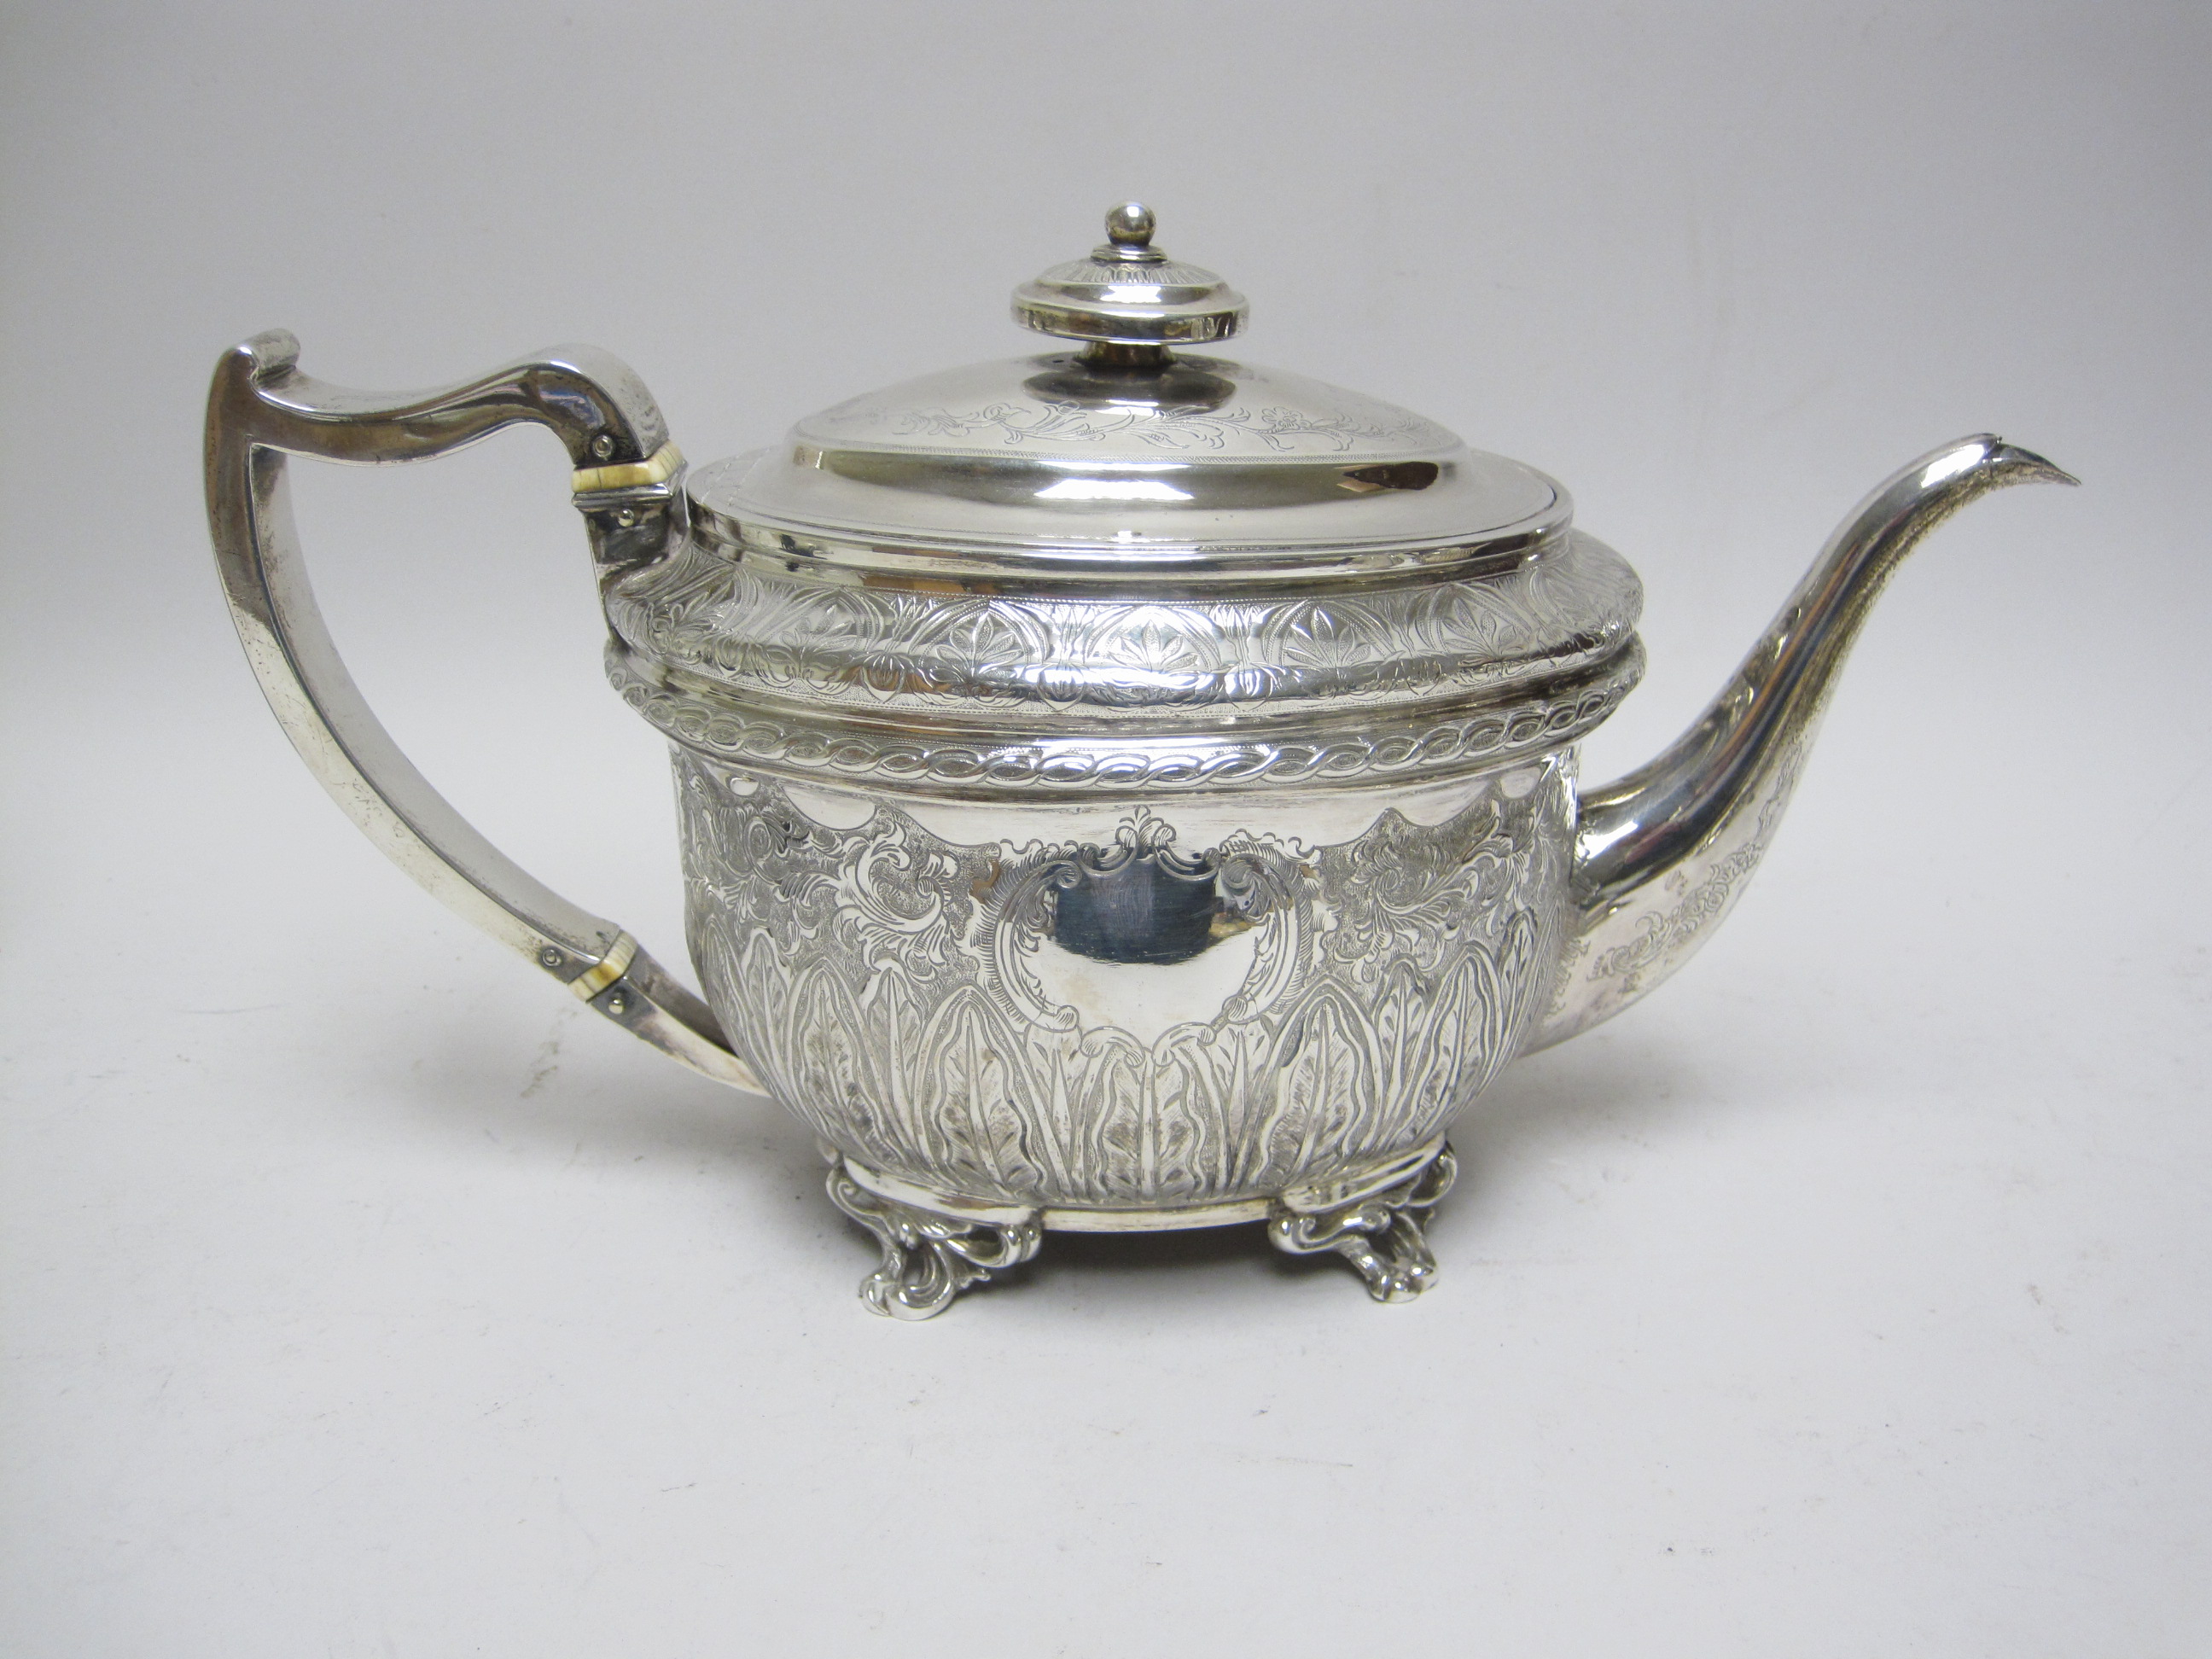 A George III silver oval Teapot with leafage engraved frieze and vacant cartouche on three leafage